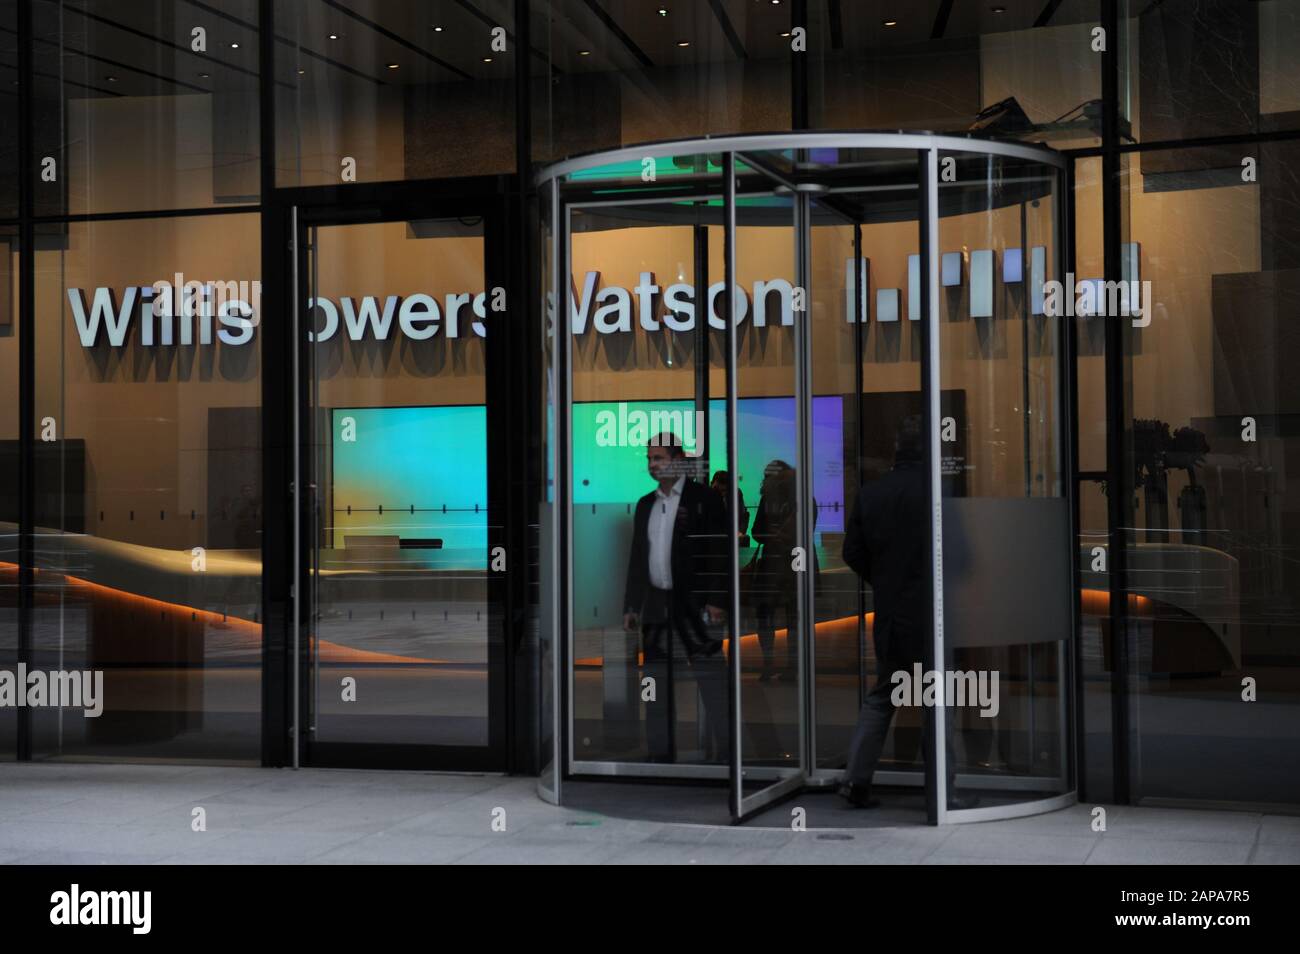 The London Headquarters of Willis Towers Watson on Lime Street in London, England Stock Photo